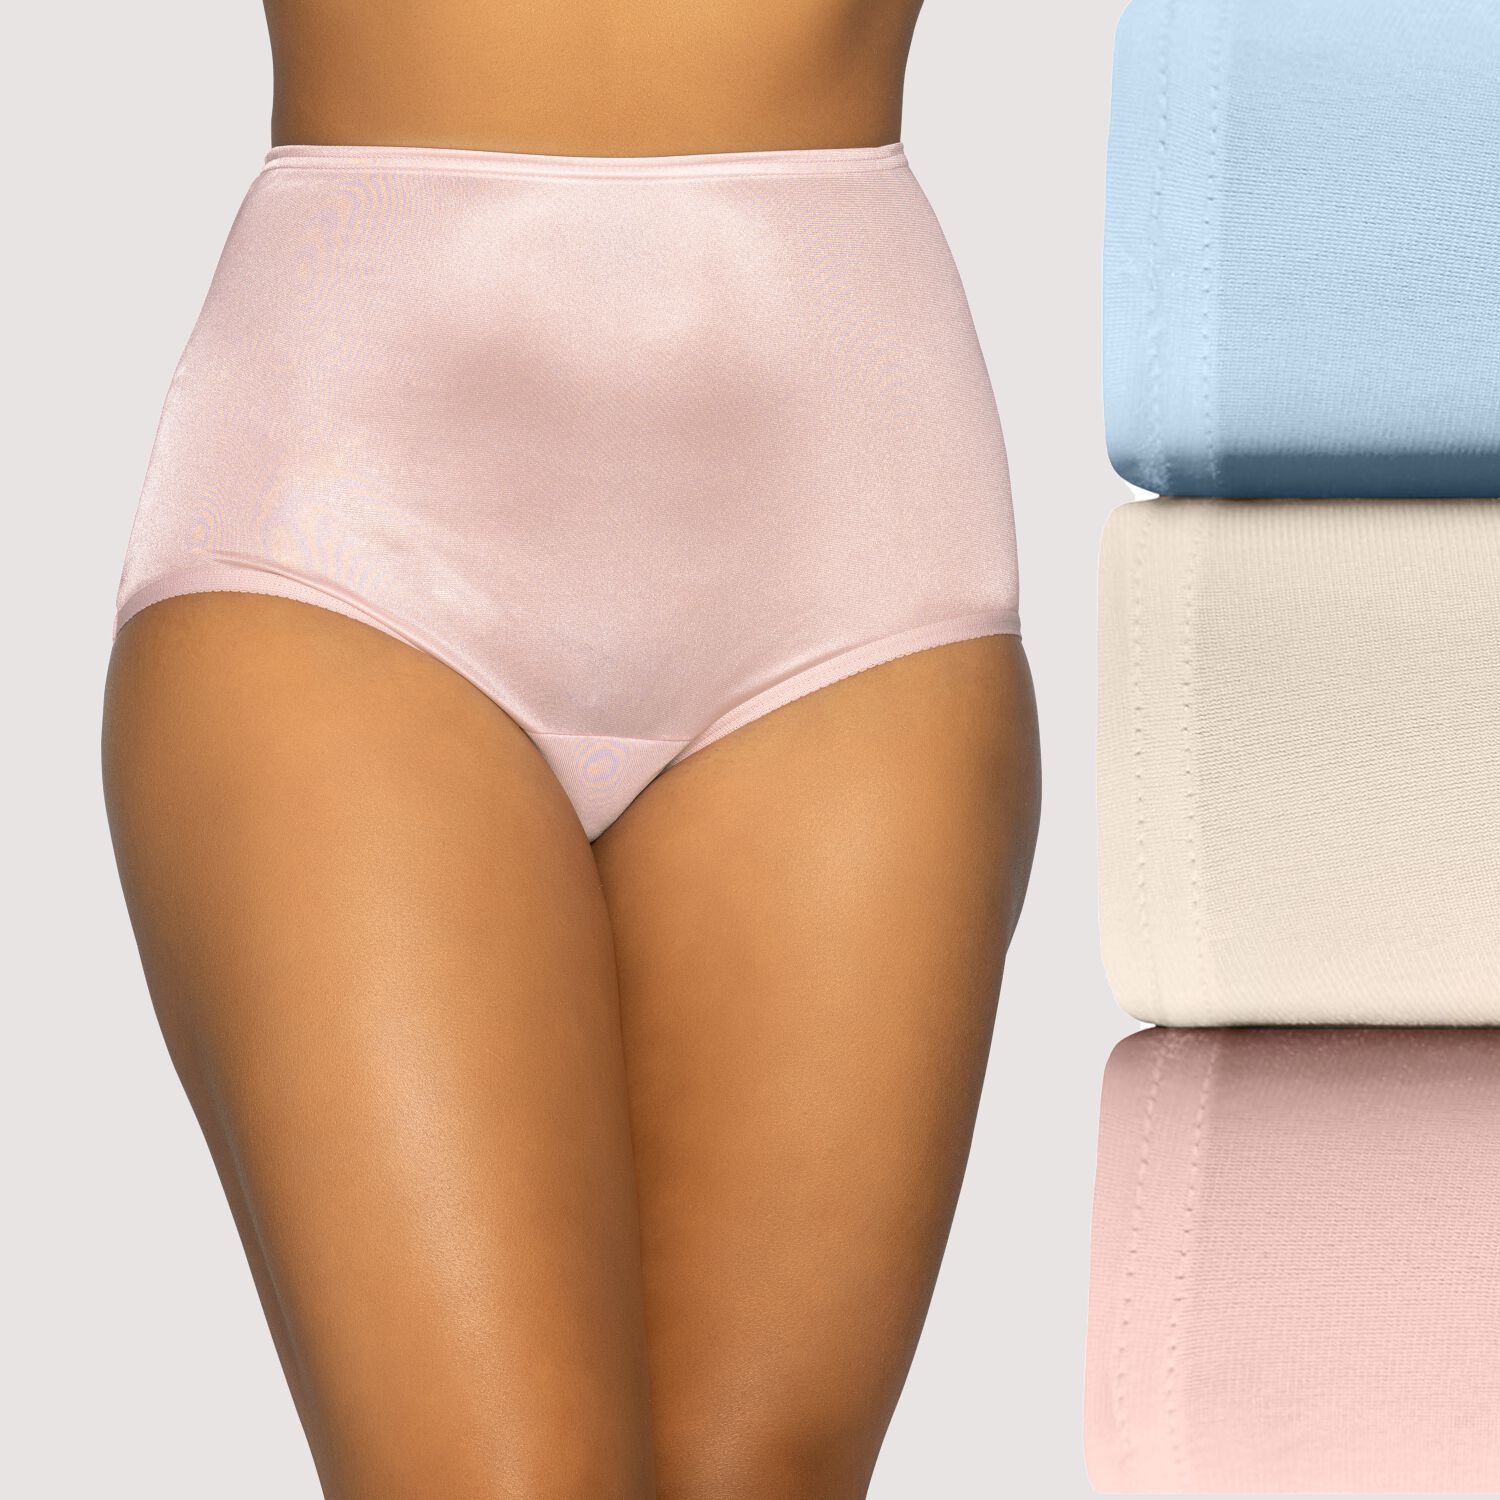 Perfectly Yours® Ravissant Tailored Full Brief , 3 Pack BLUE/CANDLEGLOW/PINK